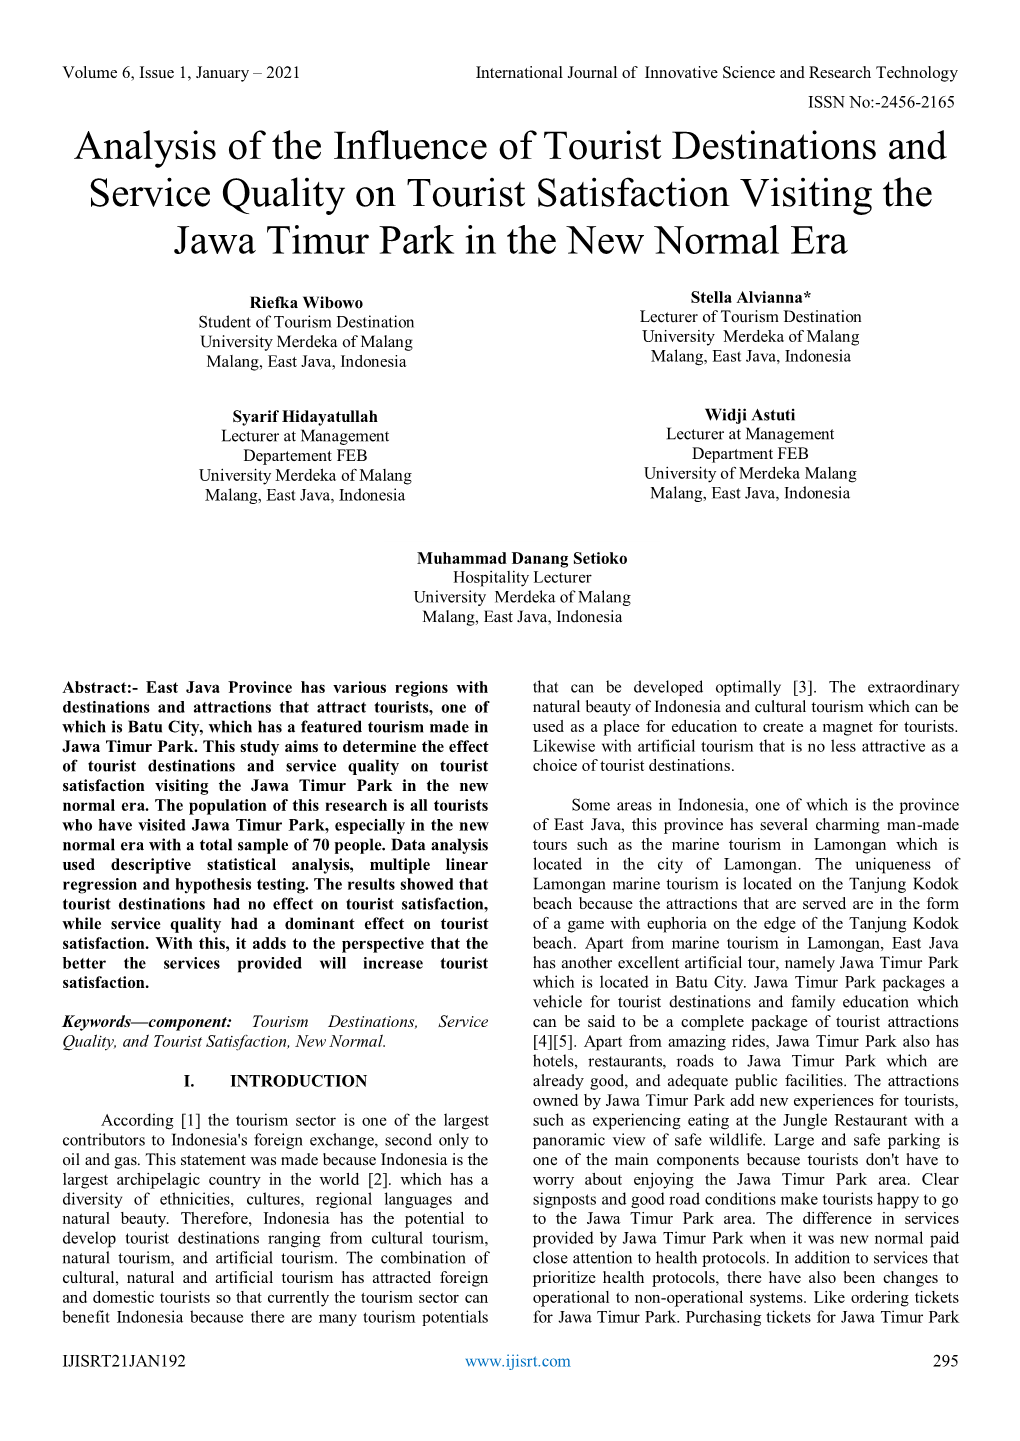 Analysis of the Influence of Tourist Destinations and Service Quality on Tourist Satisfaction Visiting the Jawa Timur Park in the New Normal Era